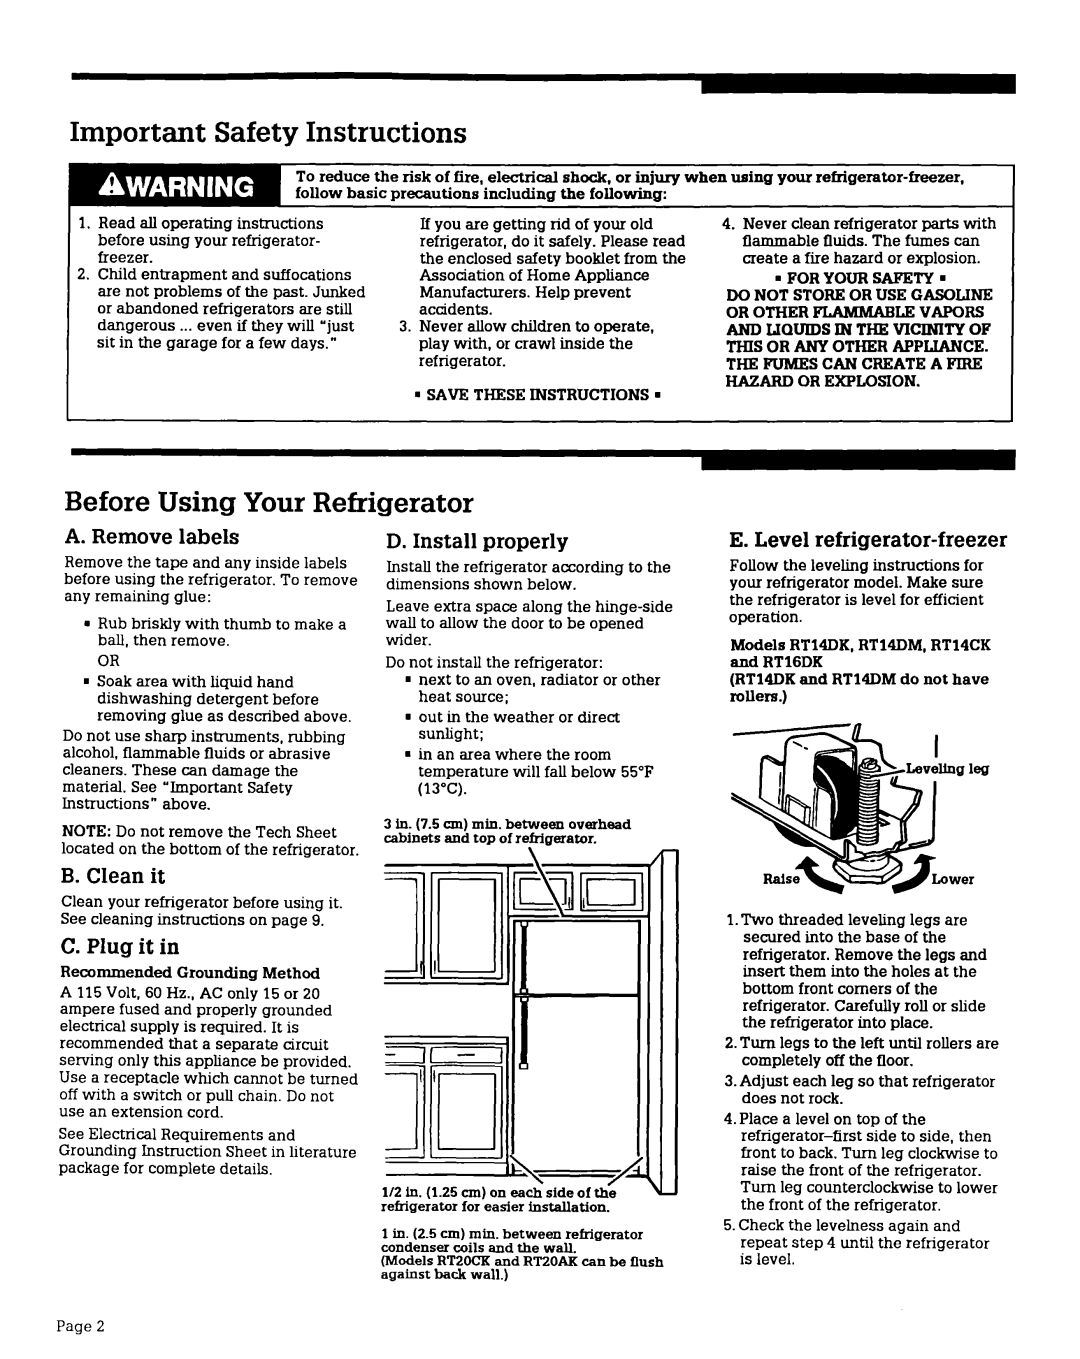 Whirlpool RTl4CK manual Important Safety Instructions, Before Using Your Refrigerator, A. Removelabels, D. Install properly 